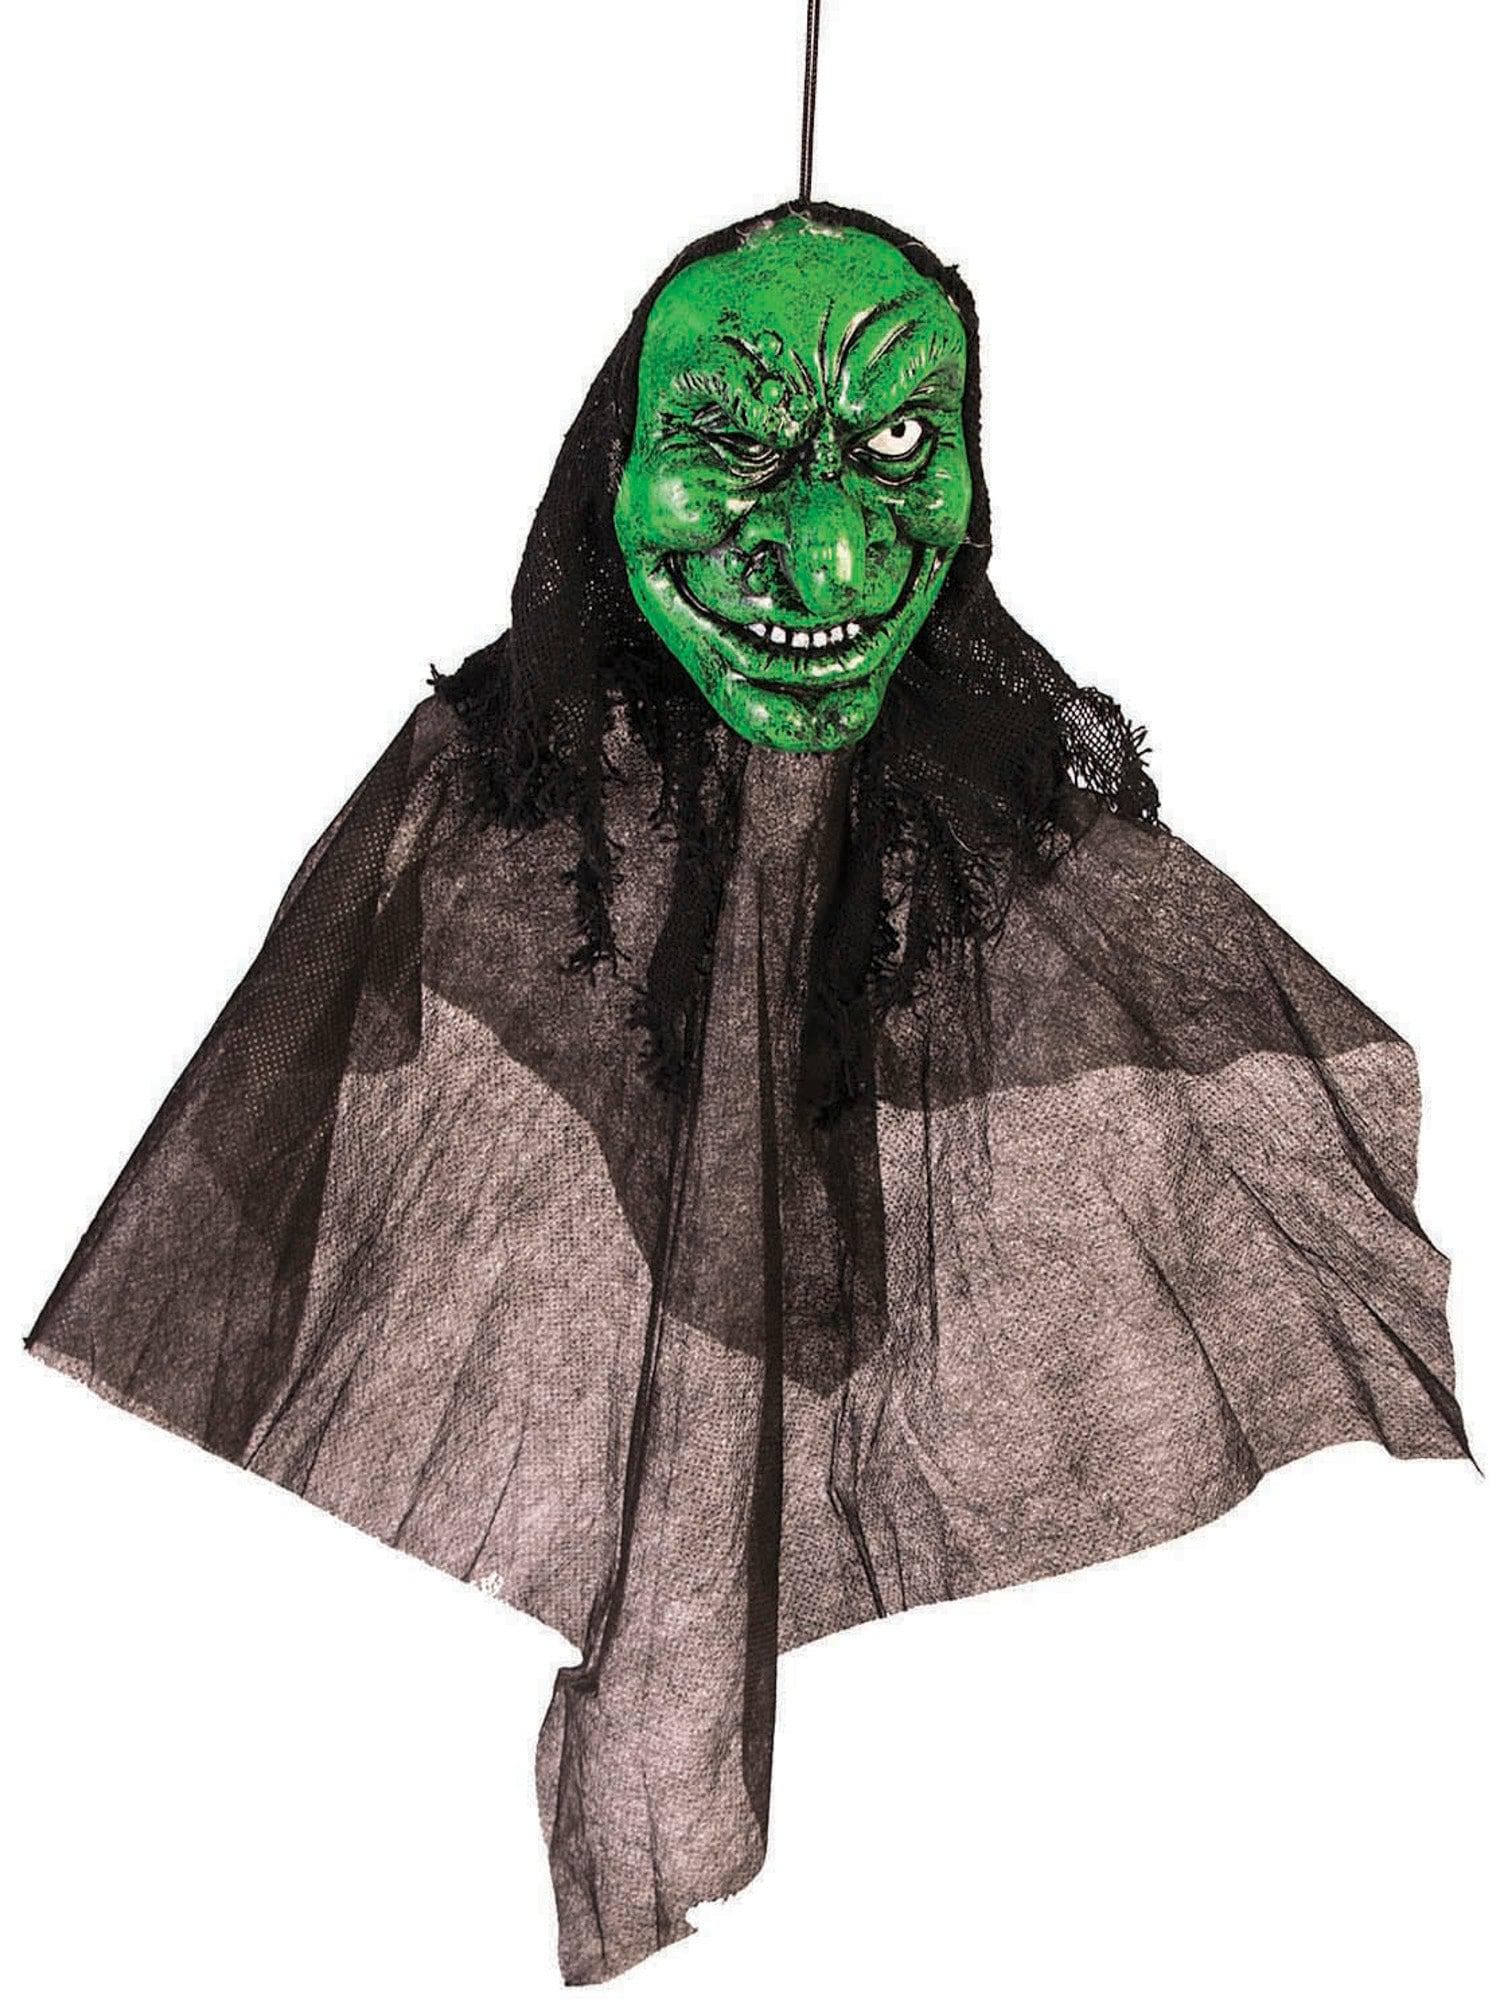 12-inch Green Witch Hanging Decoration - costumes.com